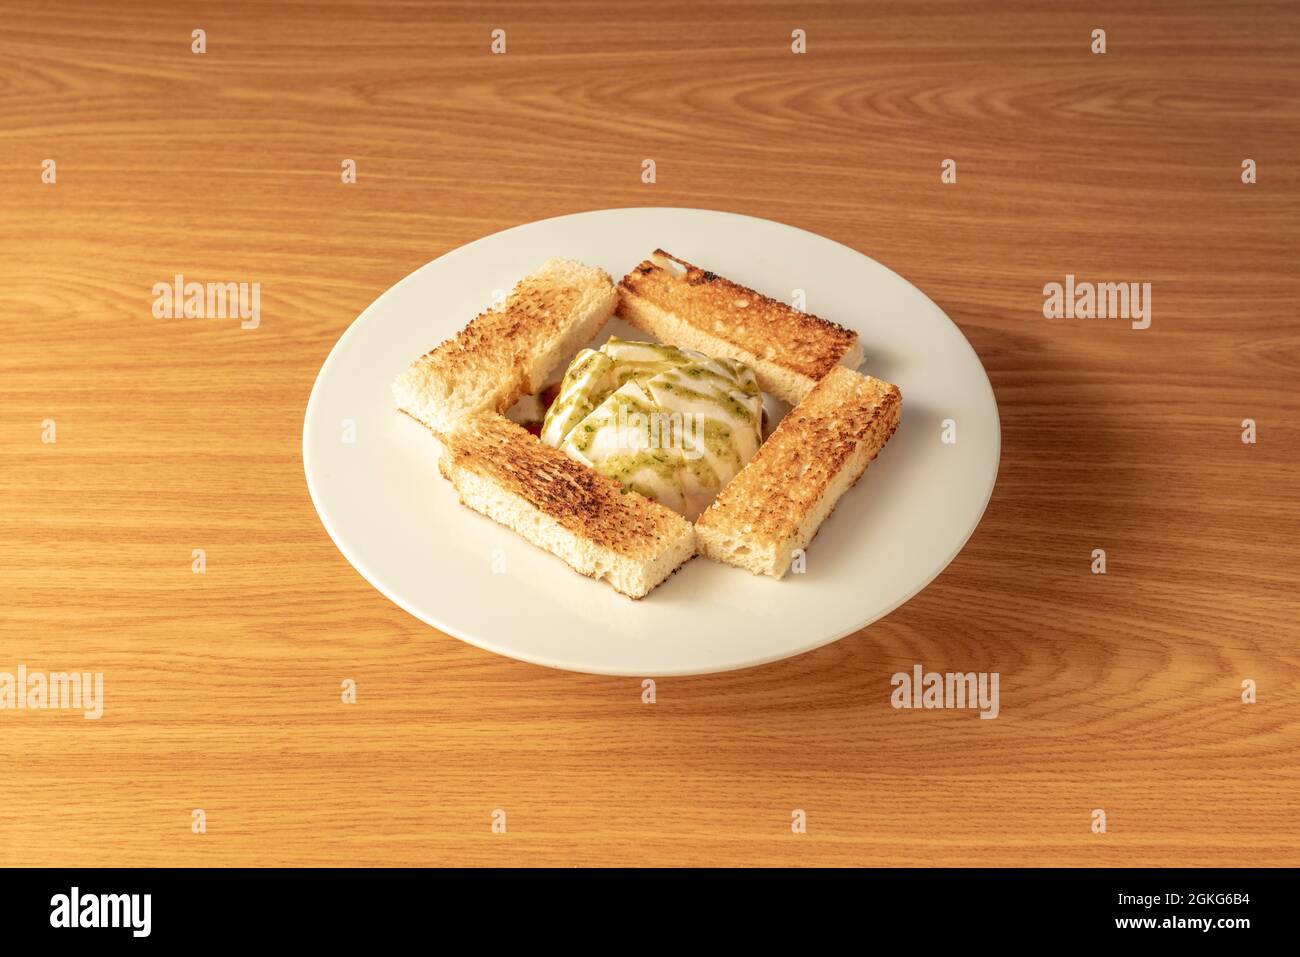 image of burrata with pesto sauce accompanied by pieces of toast Stock Photo